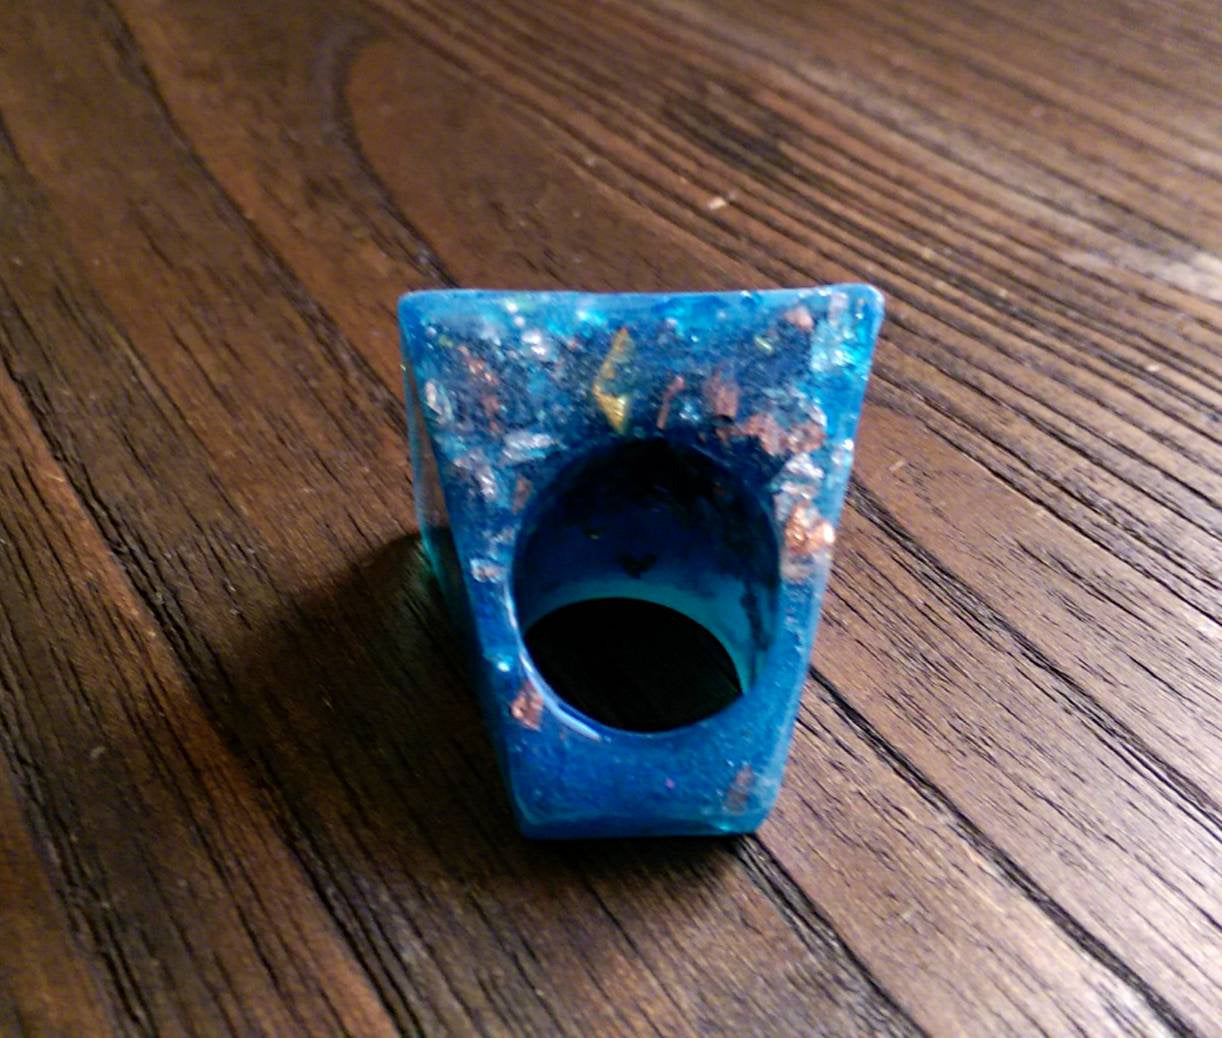 Statement Square Resin Ring, Handmade Size 7 US N AU Blue Silver Gold Rose Gold Leaf Ring